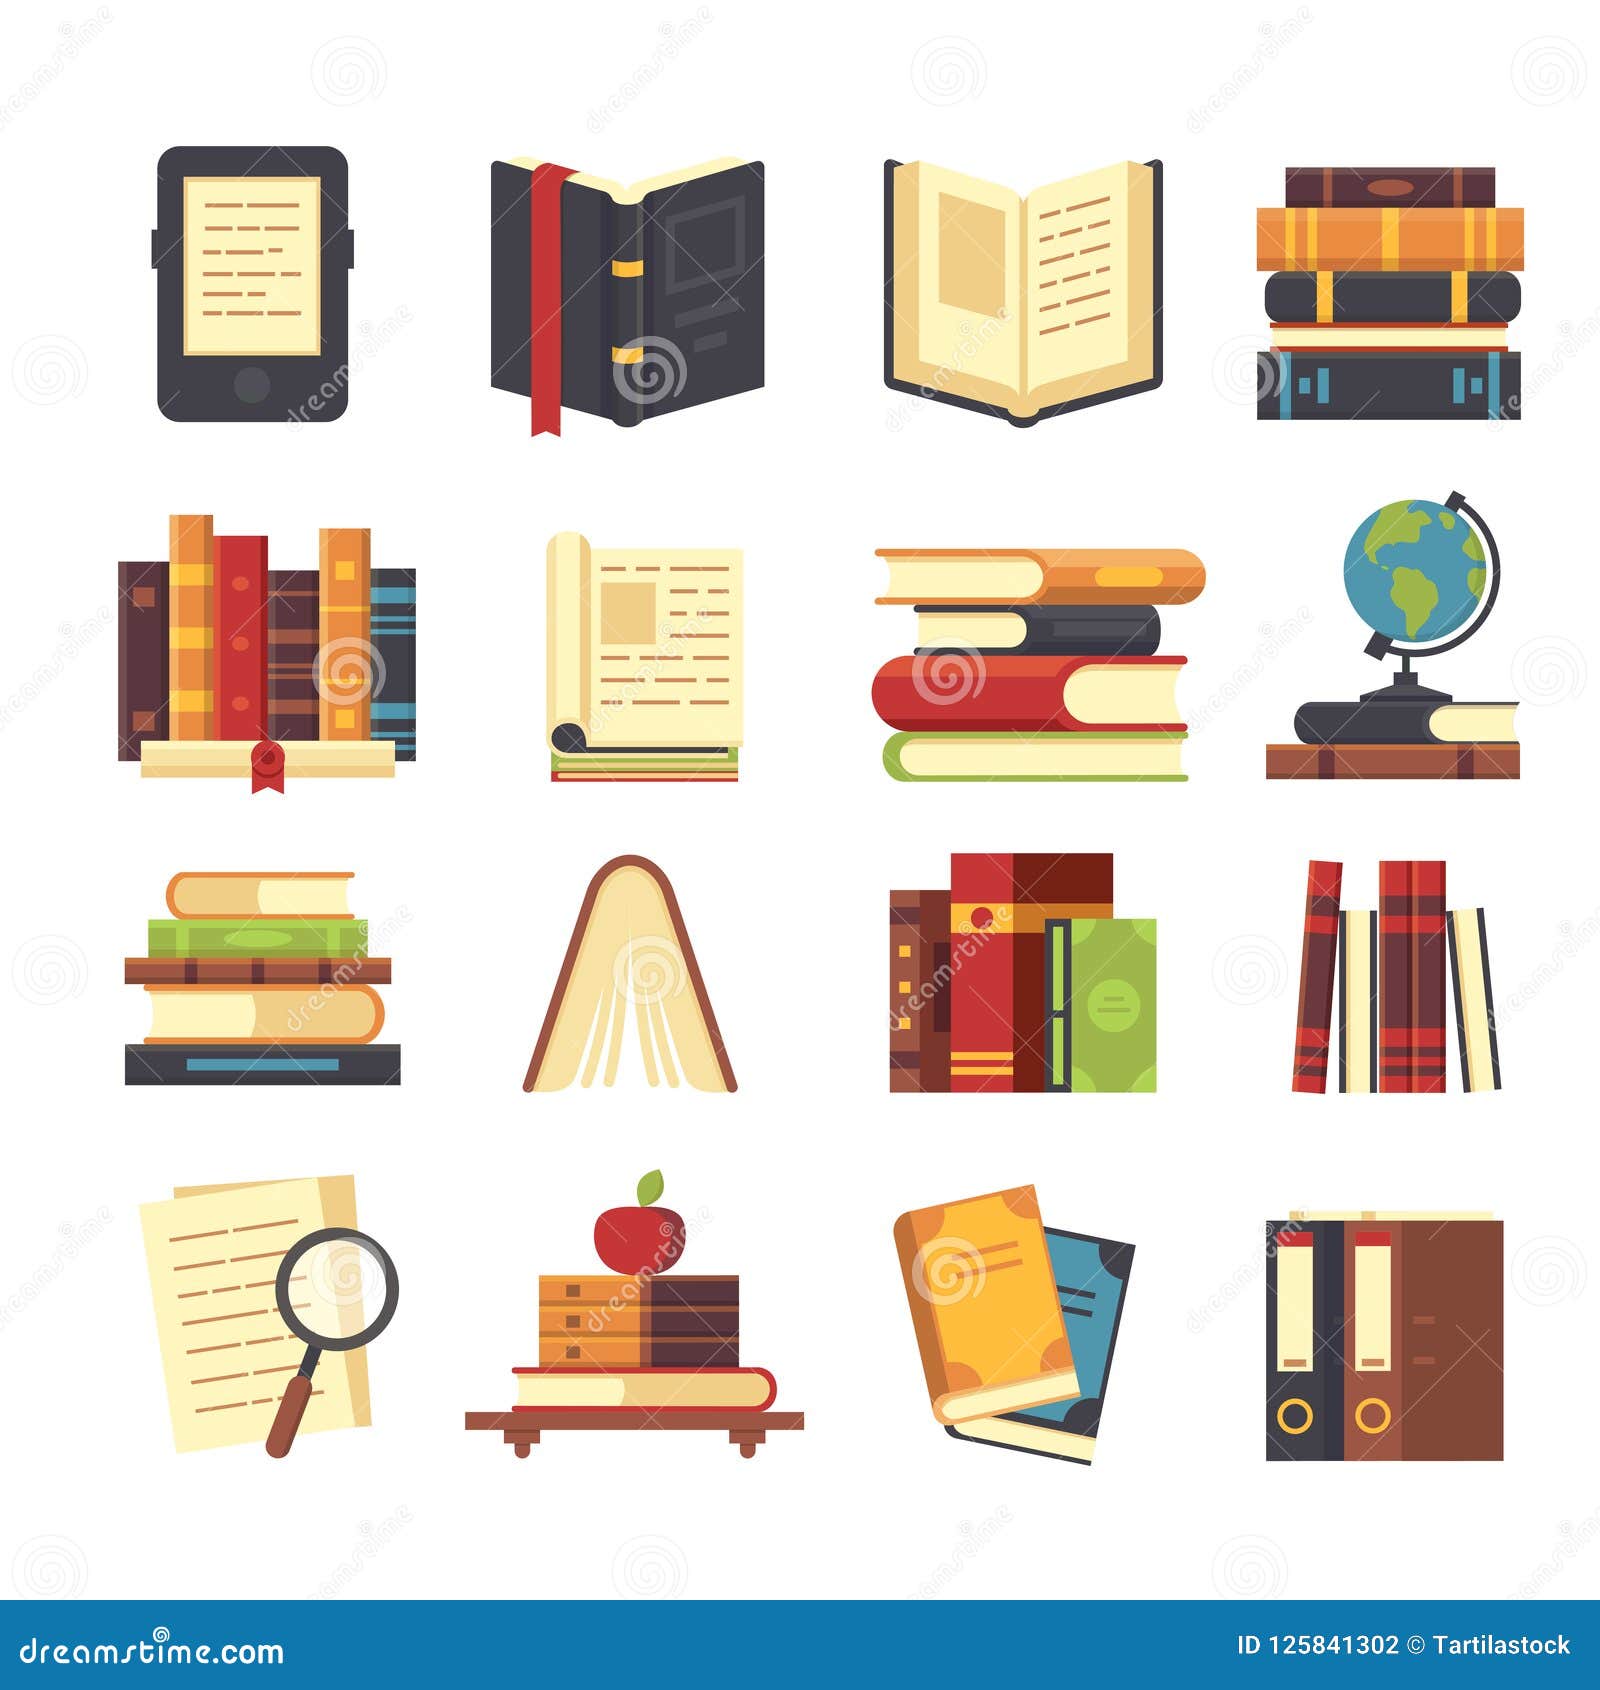 flat book icons. library books, open dictionary and encyclopedia on stand. pile of magazines, ebook and novel booklet